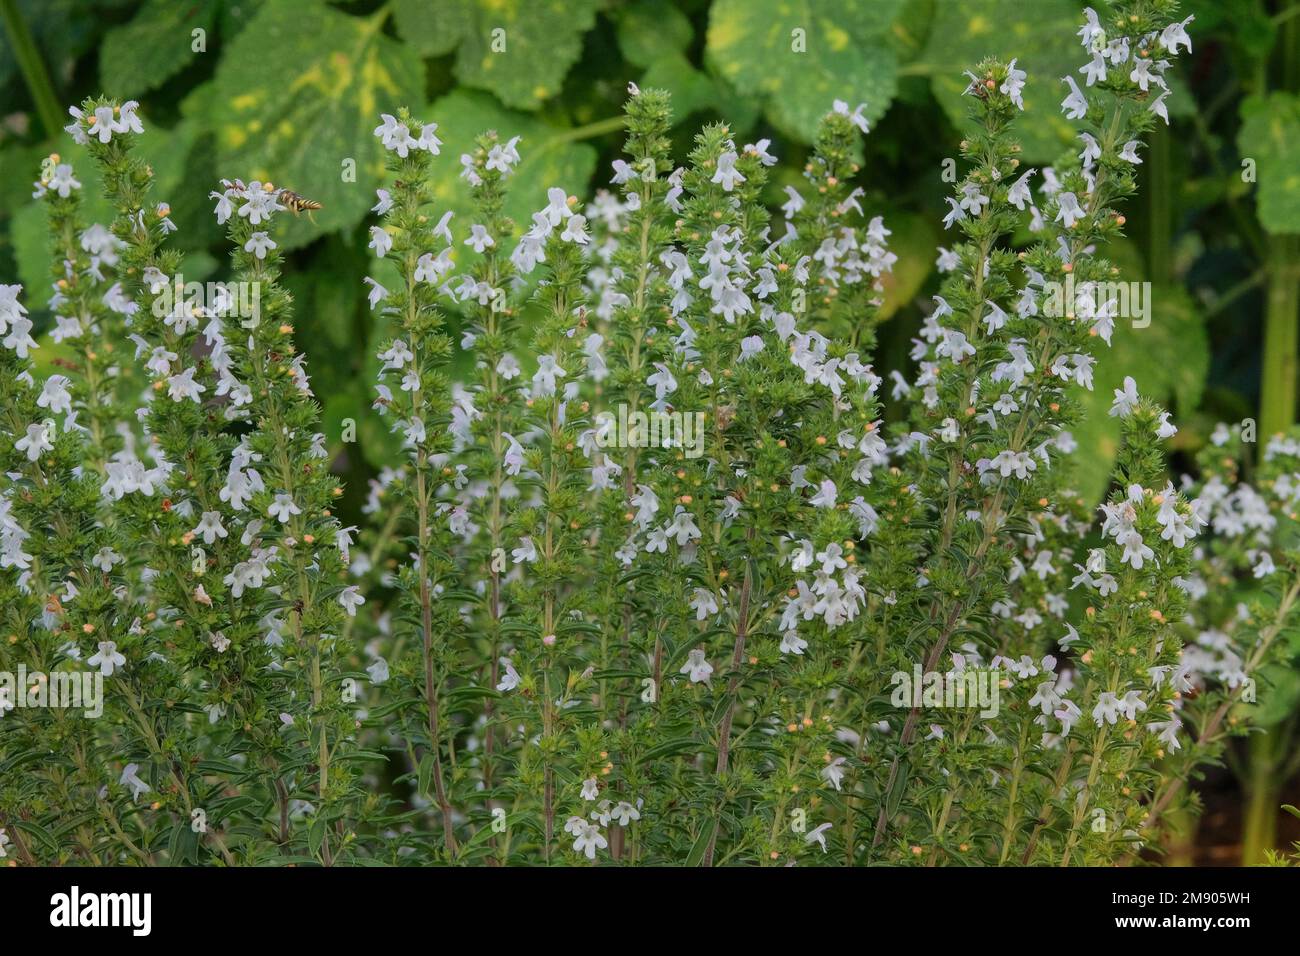 Dracocephalum grown in a rustic farm garden. White flowers in farming and harvesting. Alpine meadows. Stock Photo